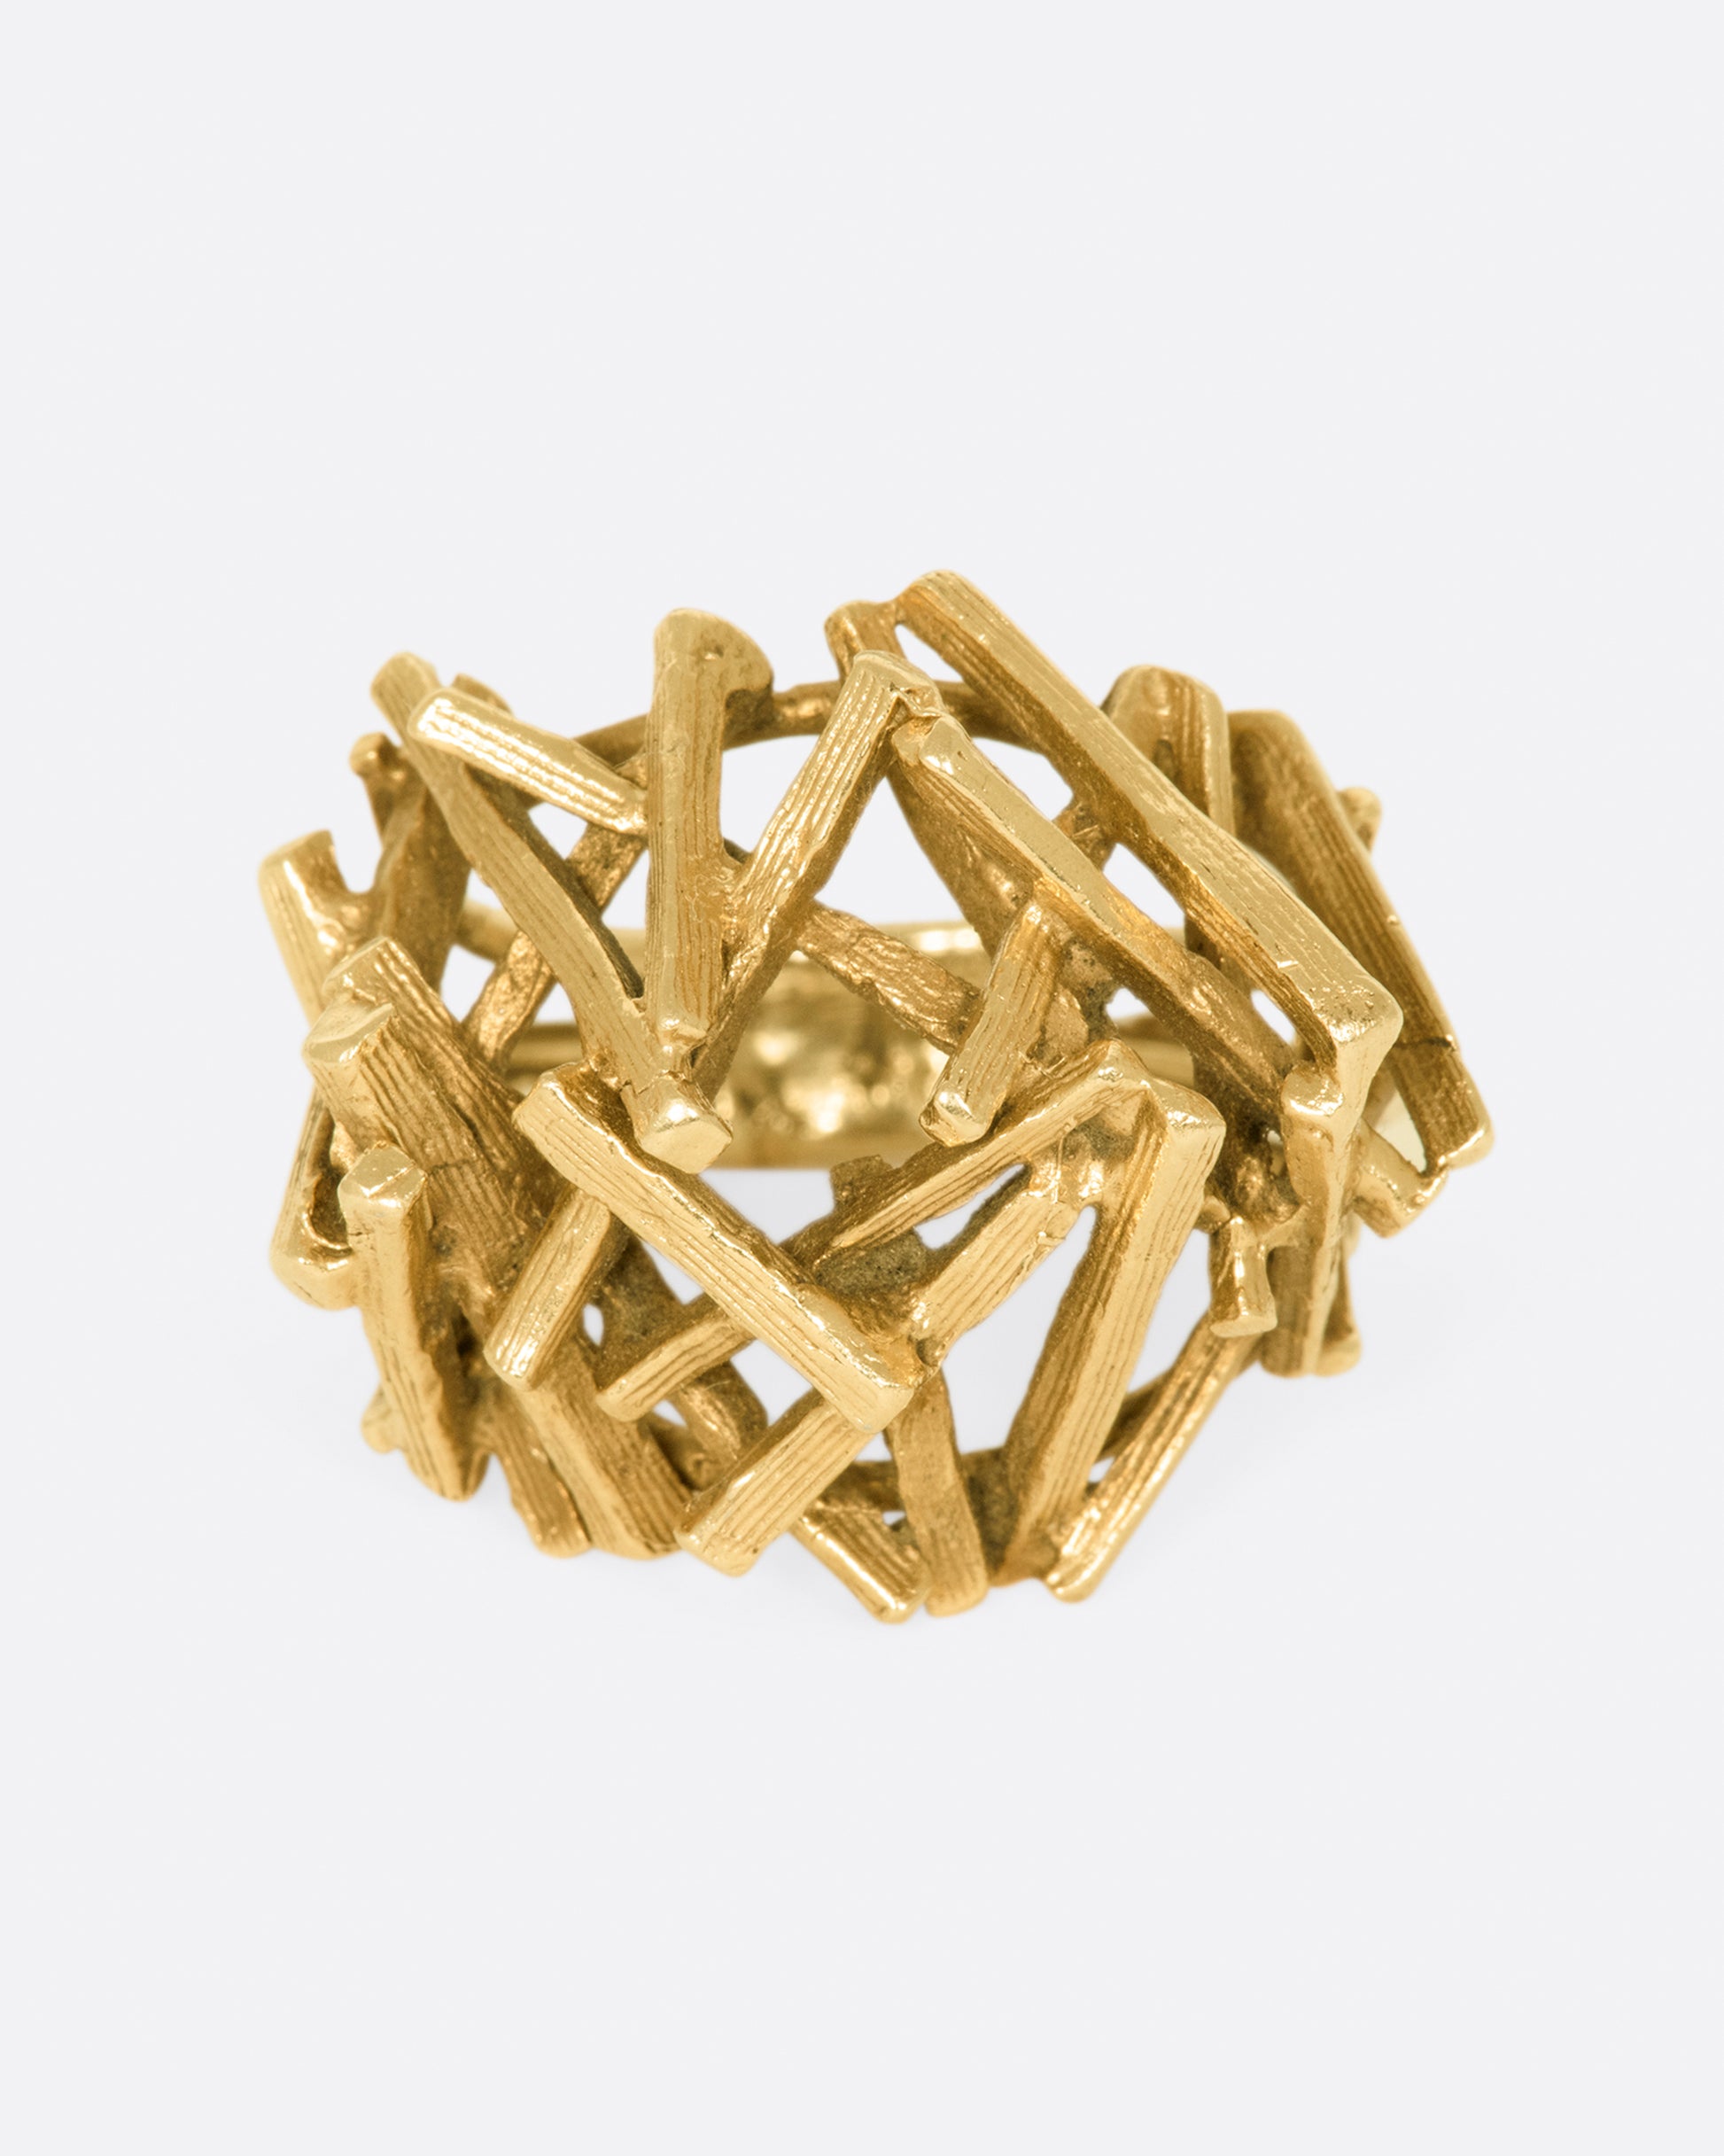 A vintage 15k gold pile of sticks ring that sits high above your finger in an incredible 3D dome